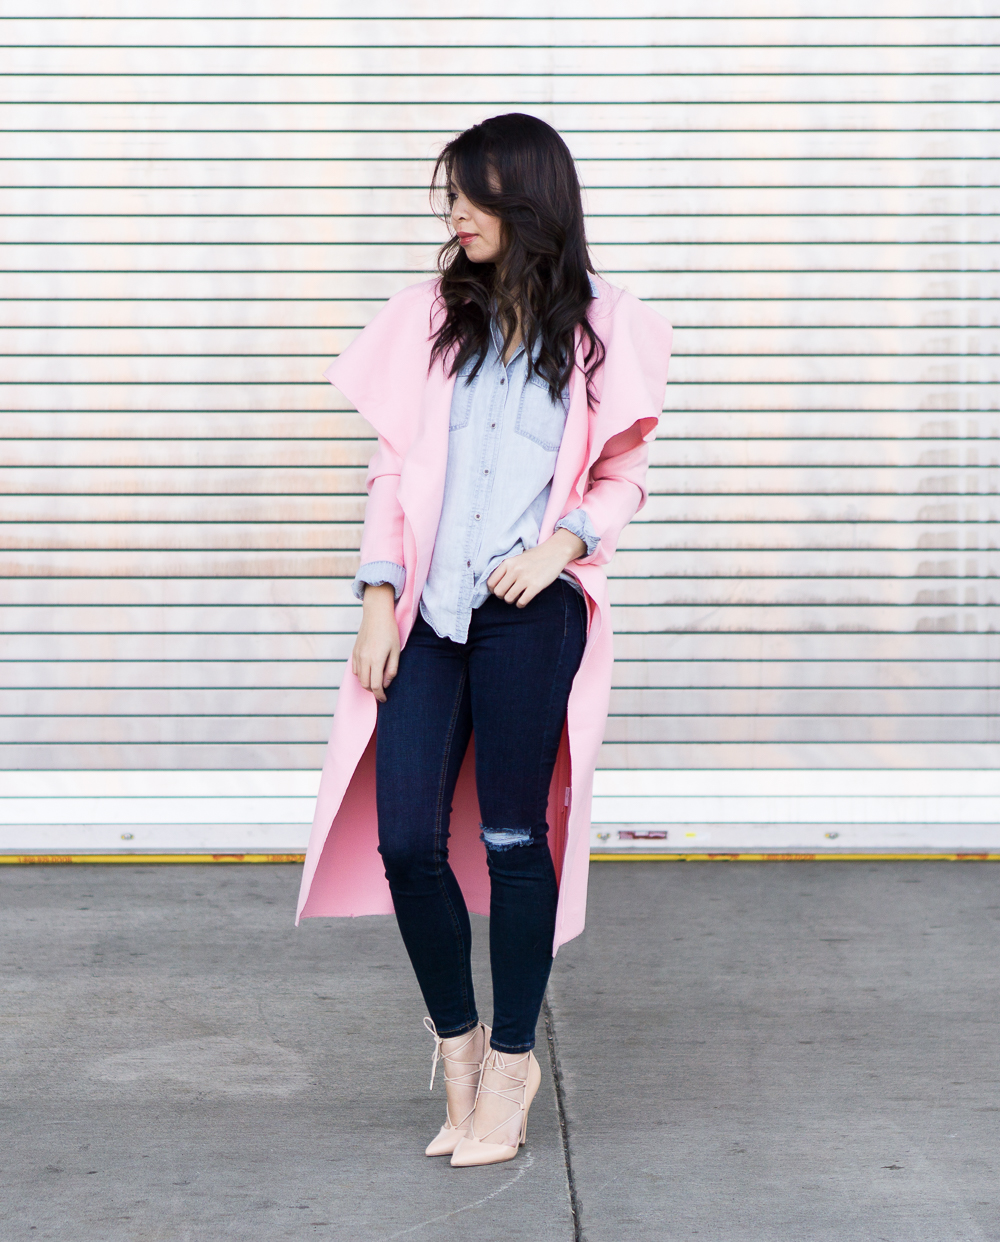 pink coat outfit, skinny jeans, lace up heels